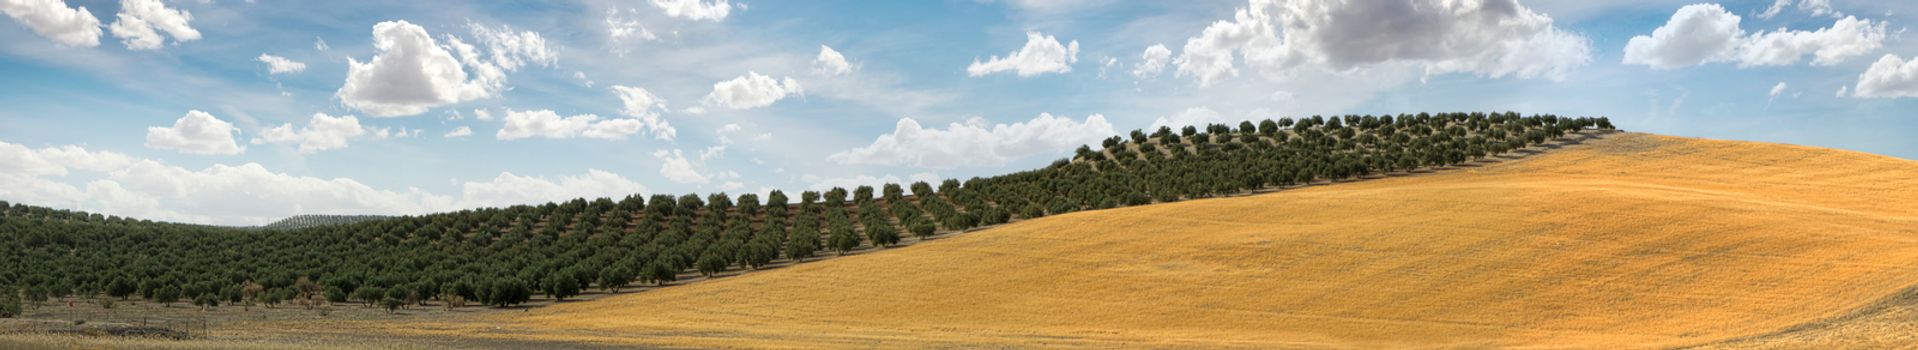 Panoramic image of olive plantation and cloudy sky. Trees on rows